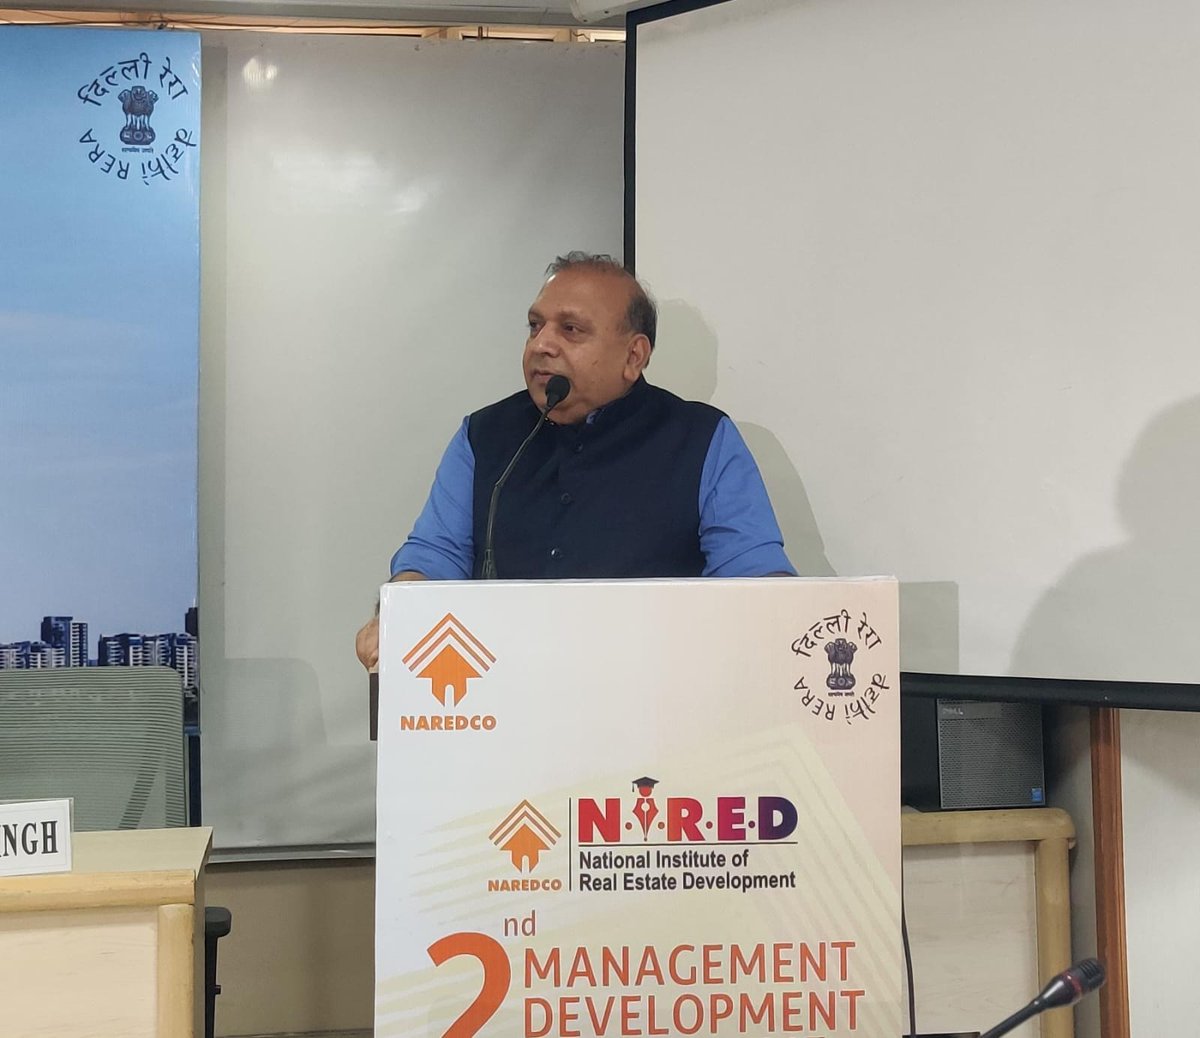 Shri Anand Kumar, Chairman, Delhi RERA, delivers a compelling address on the impact of RERA on the real estate market and its future trajectory. 

#MDP2024 #RERA #RealEstateRegulations #realestateindustry

@ReAIndia @MoHUA_India @HardeepSPuri @Housing
@AnandRERAdelhi